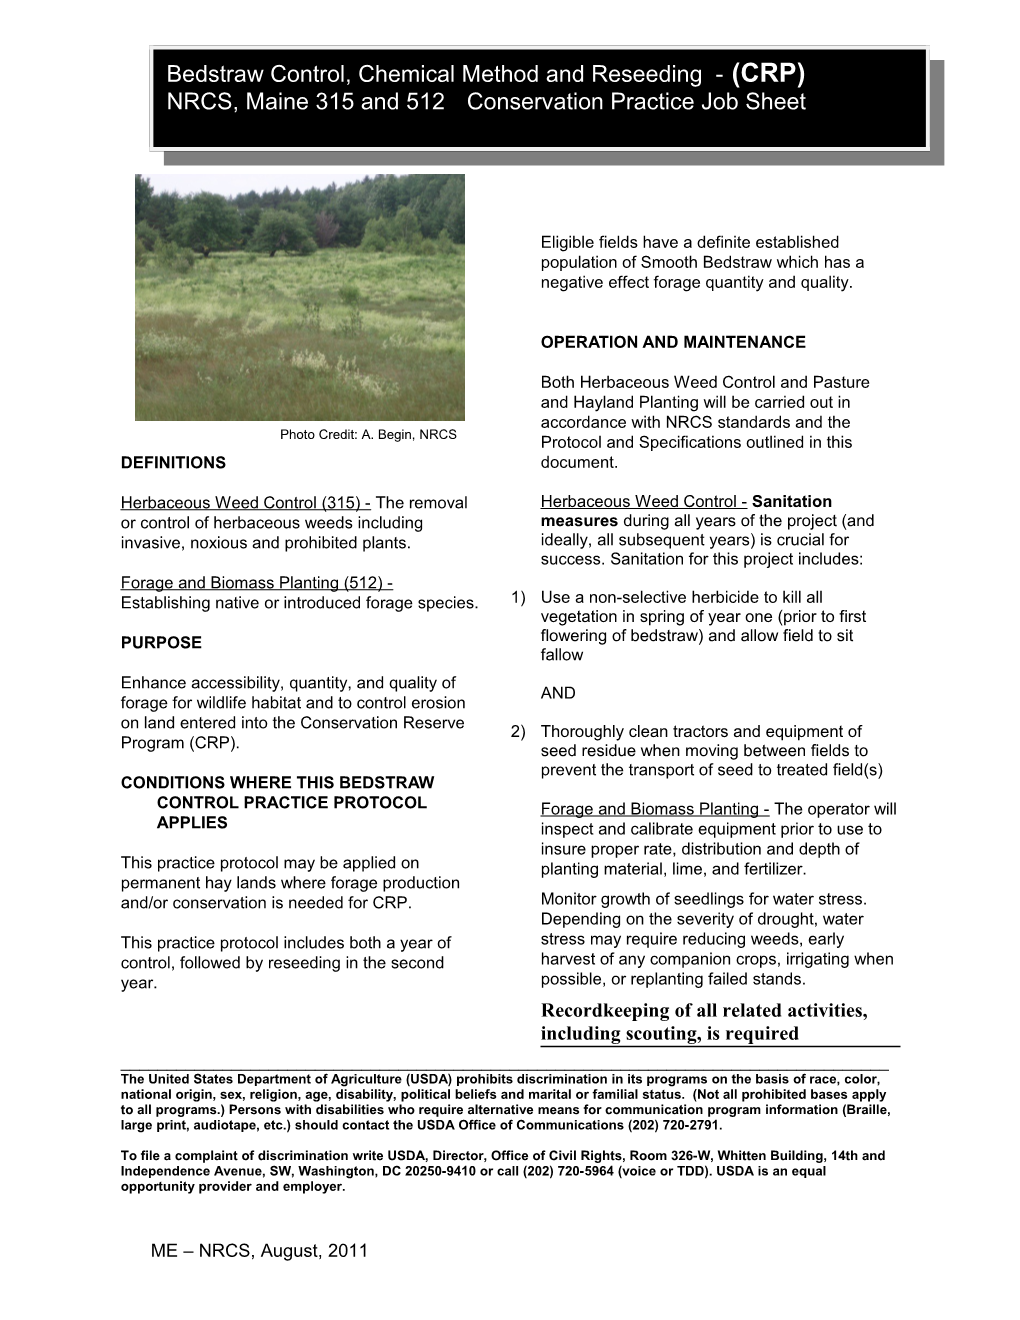 Maine Job Sheet for Wild Blueberry Conservation Practices Mulching Code 484